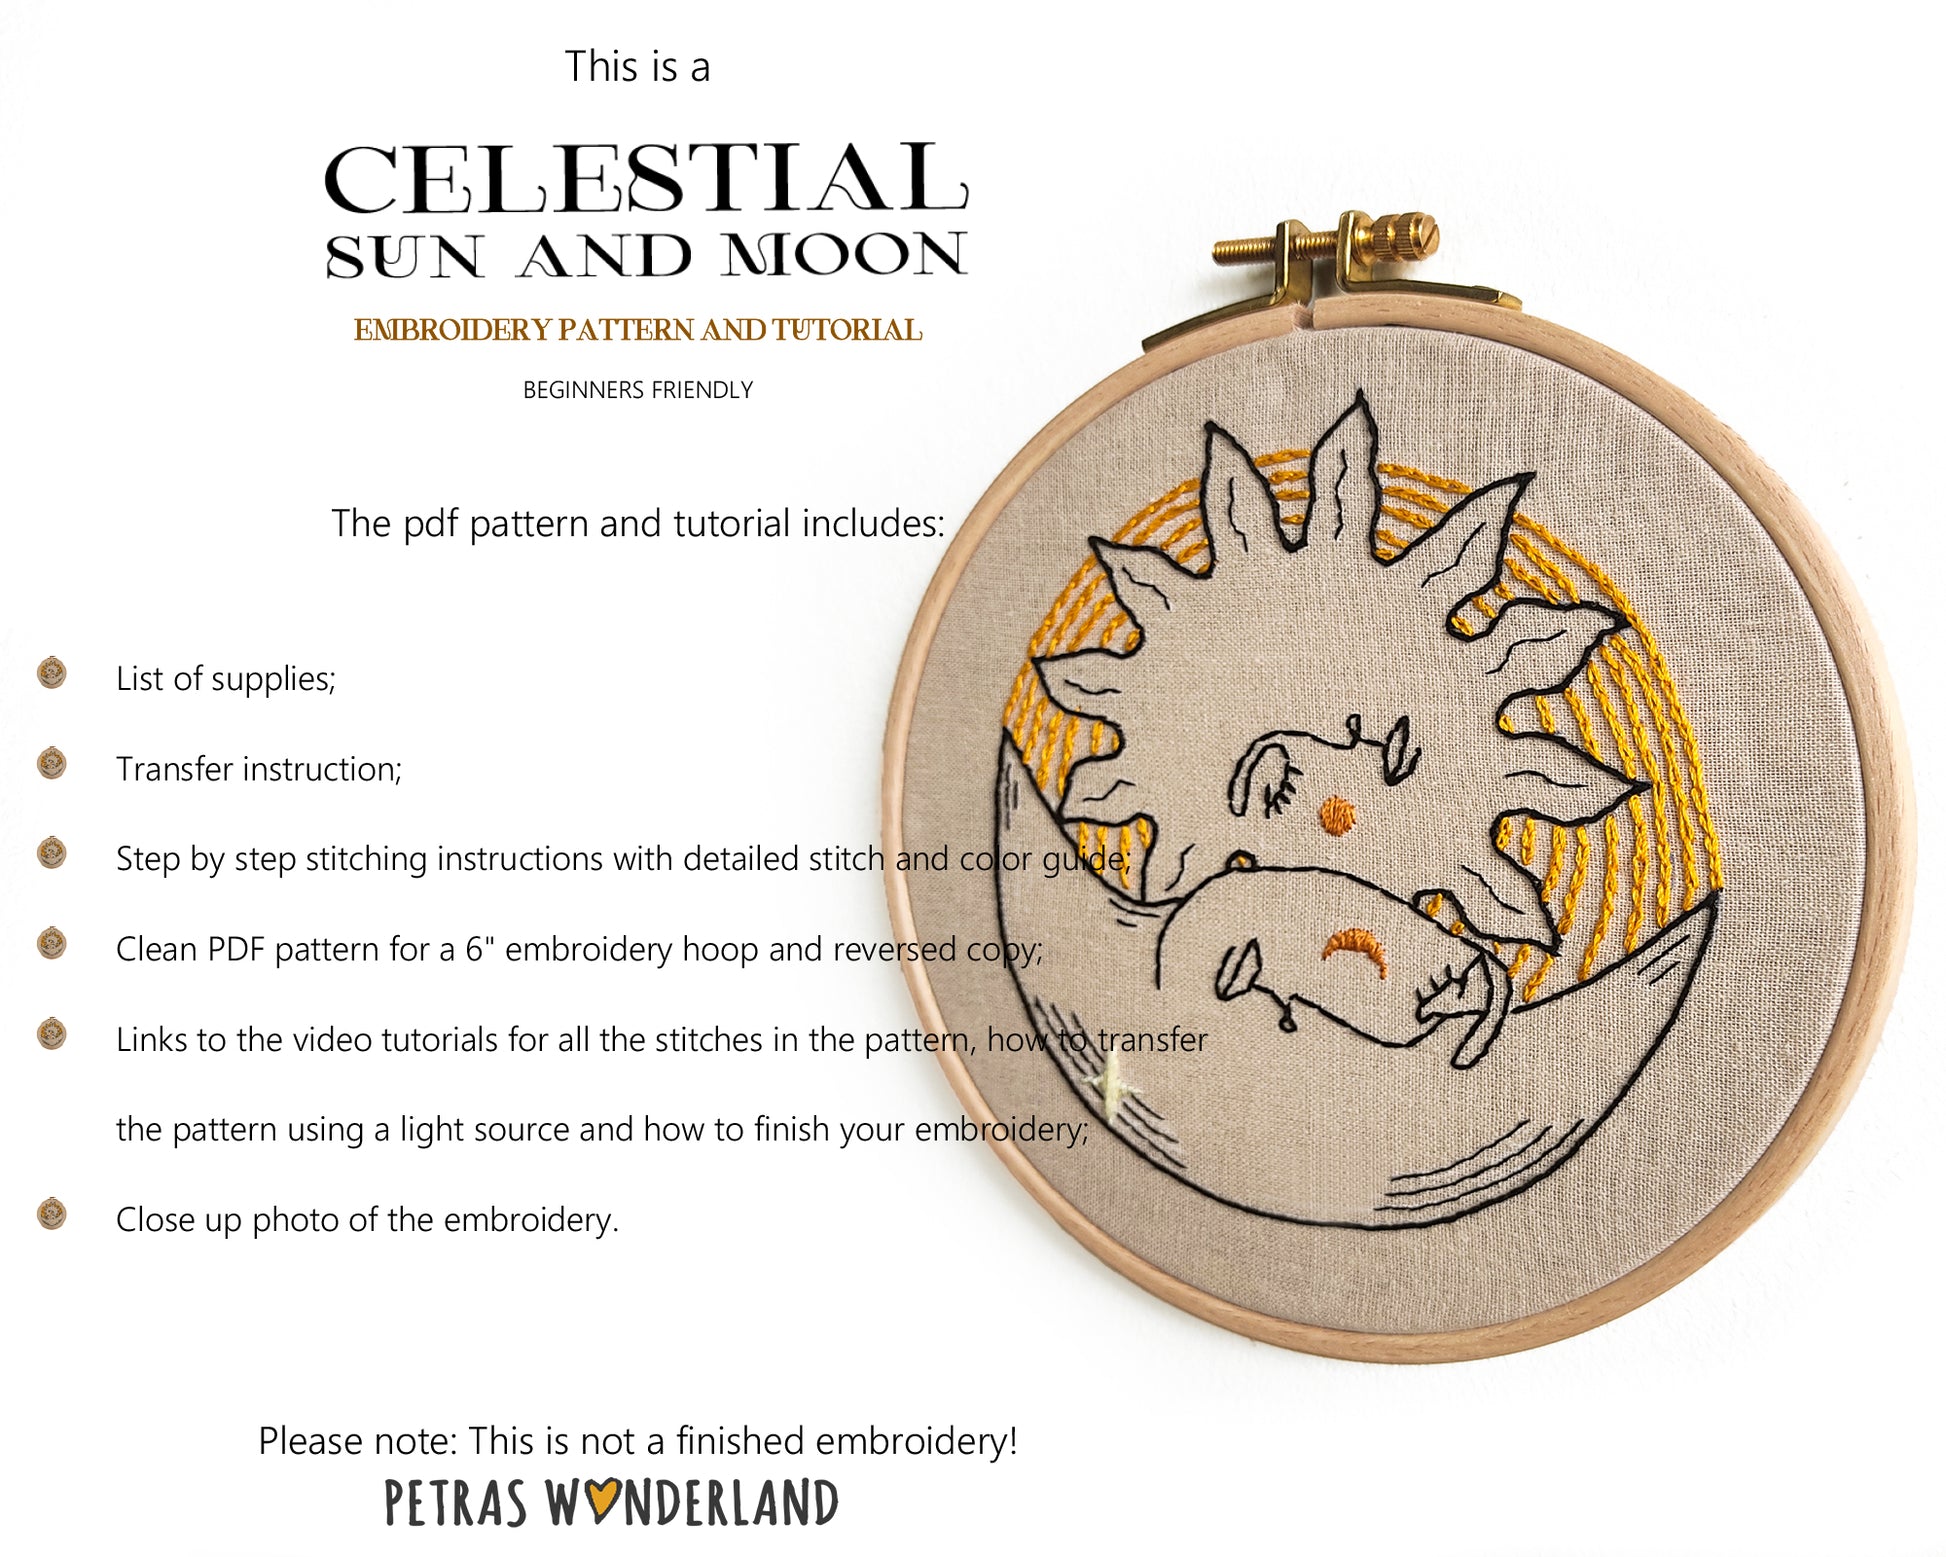 Celestial Sun and Moon - PDF embroidery pattern and tutorial 08